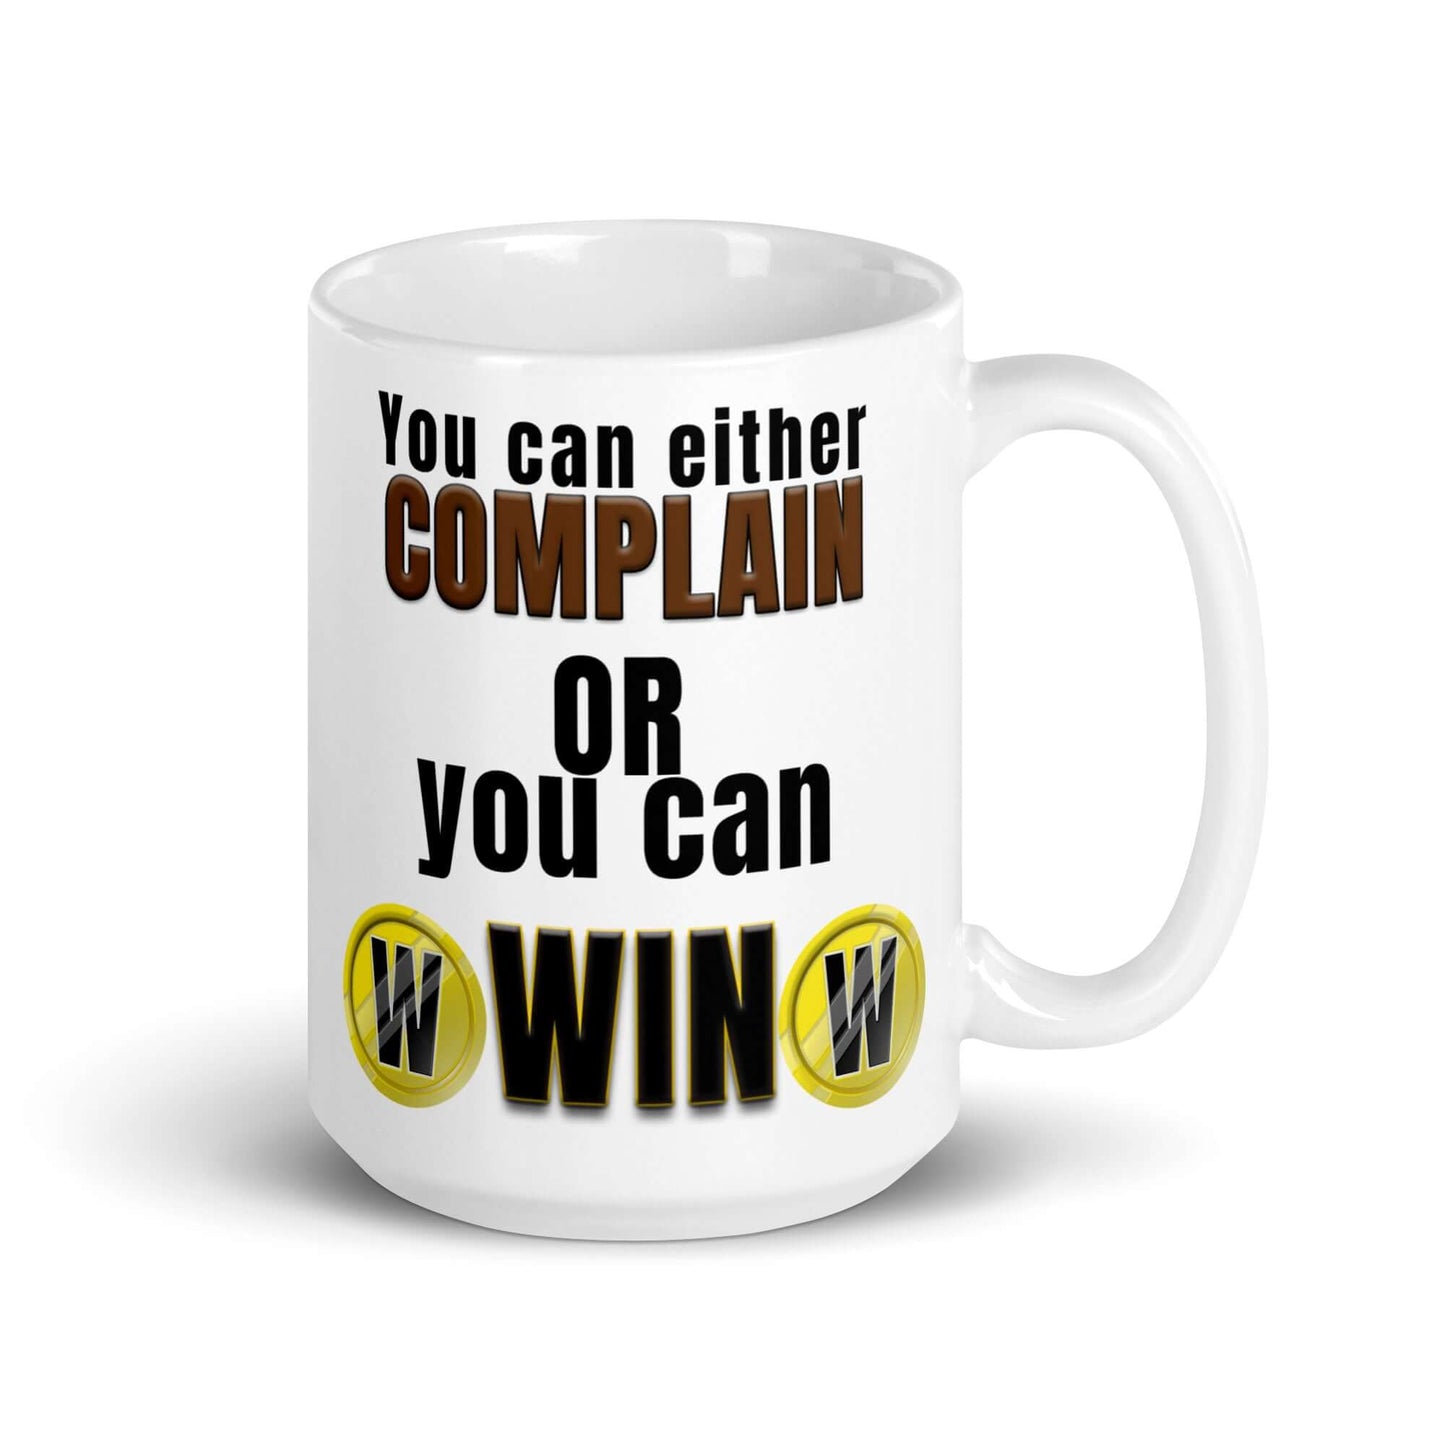 You can either complain, or you can win - White glossy mug